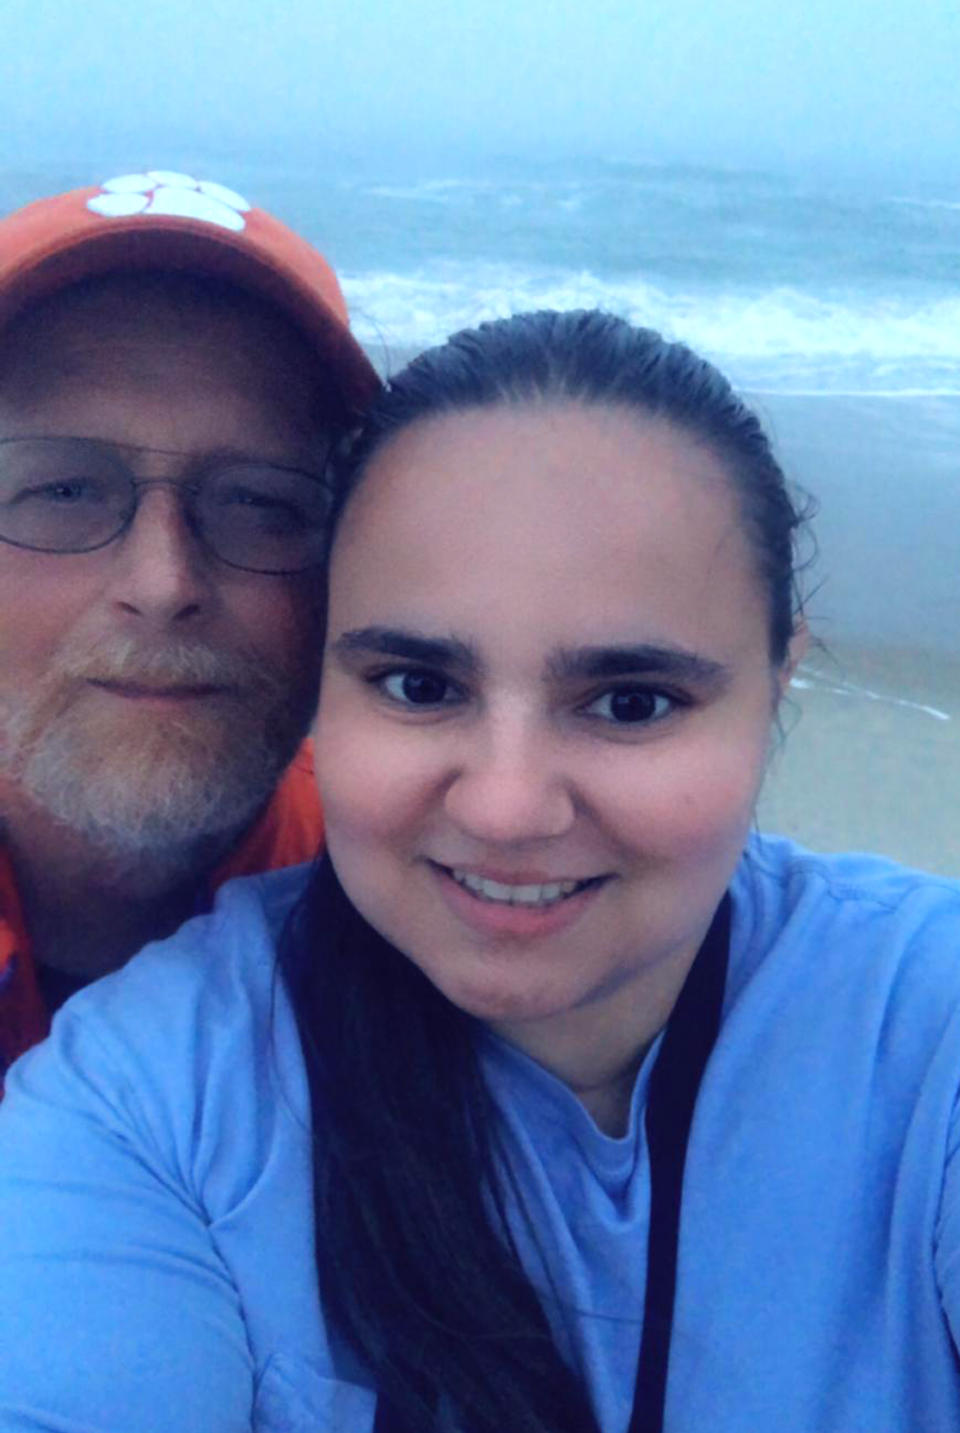  Anda Melton, 29, with her 58-year-old boyfriend and her best friend's dad, Robert Pittman